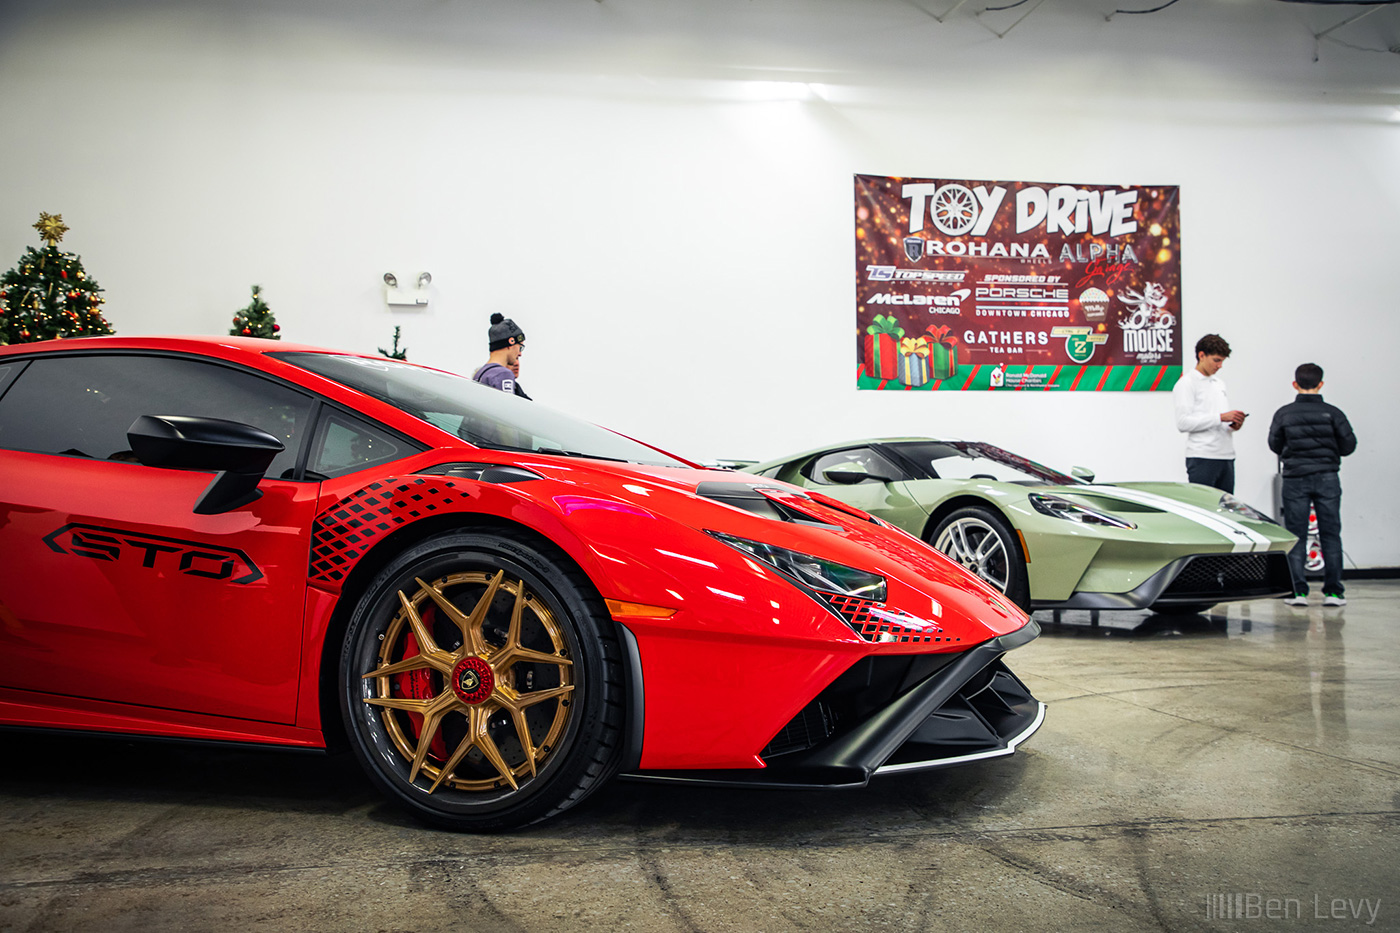 Lamborghini Huracan STO and Ford GT at Alpha Garage Chicago